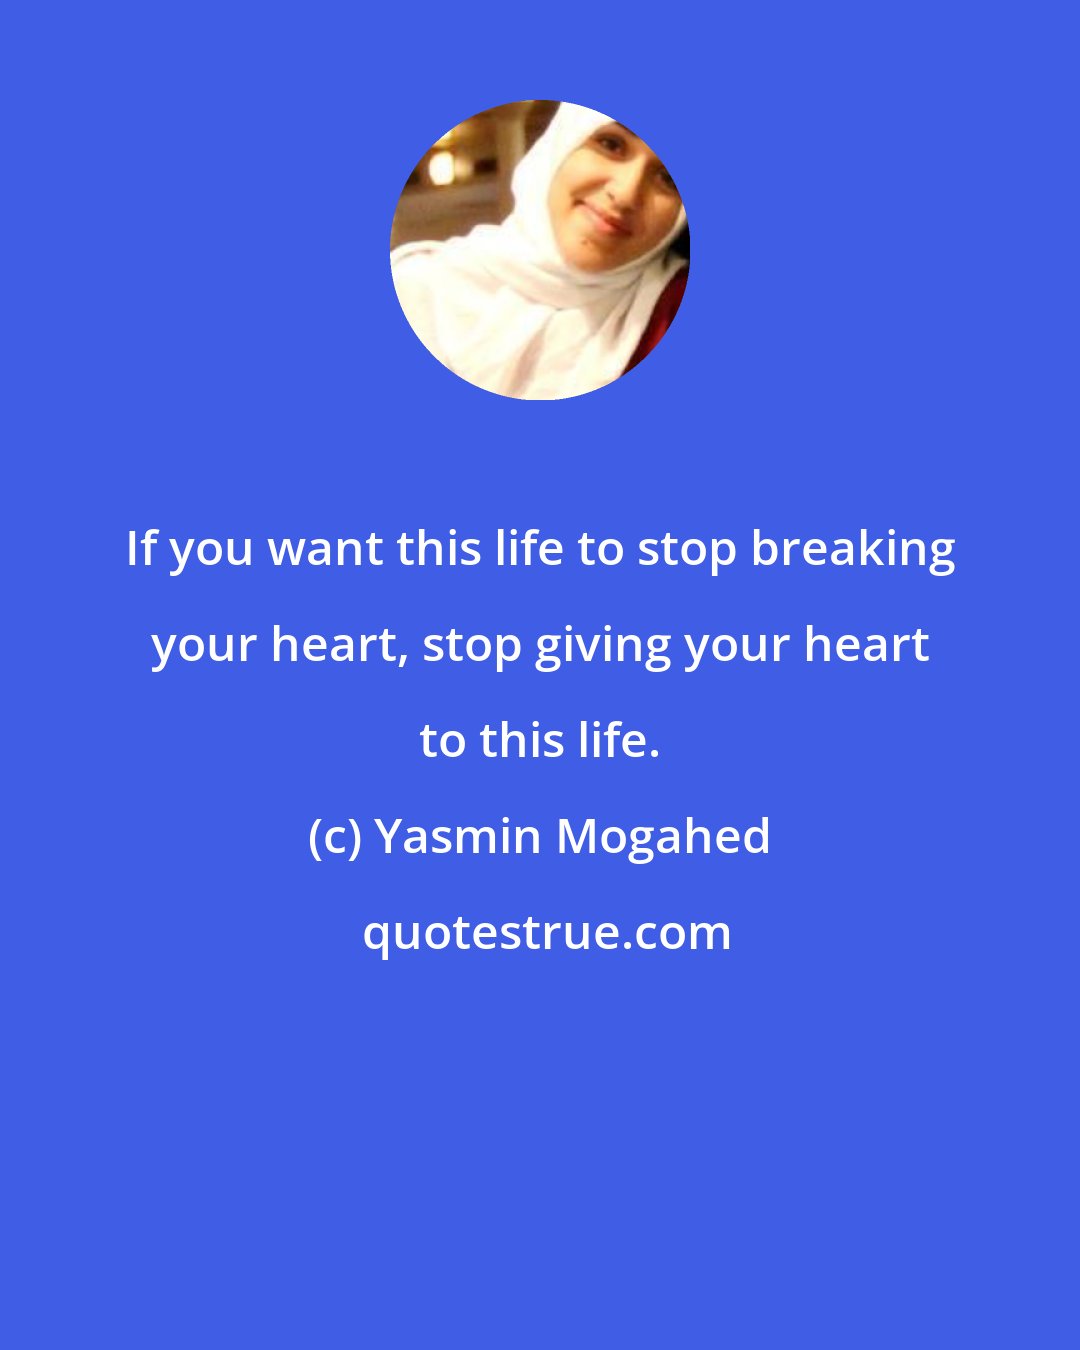 Yasmin Mogahed: If you want this life to stop breaking your heart, stop giving your heart to this life.